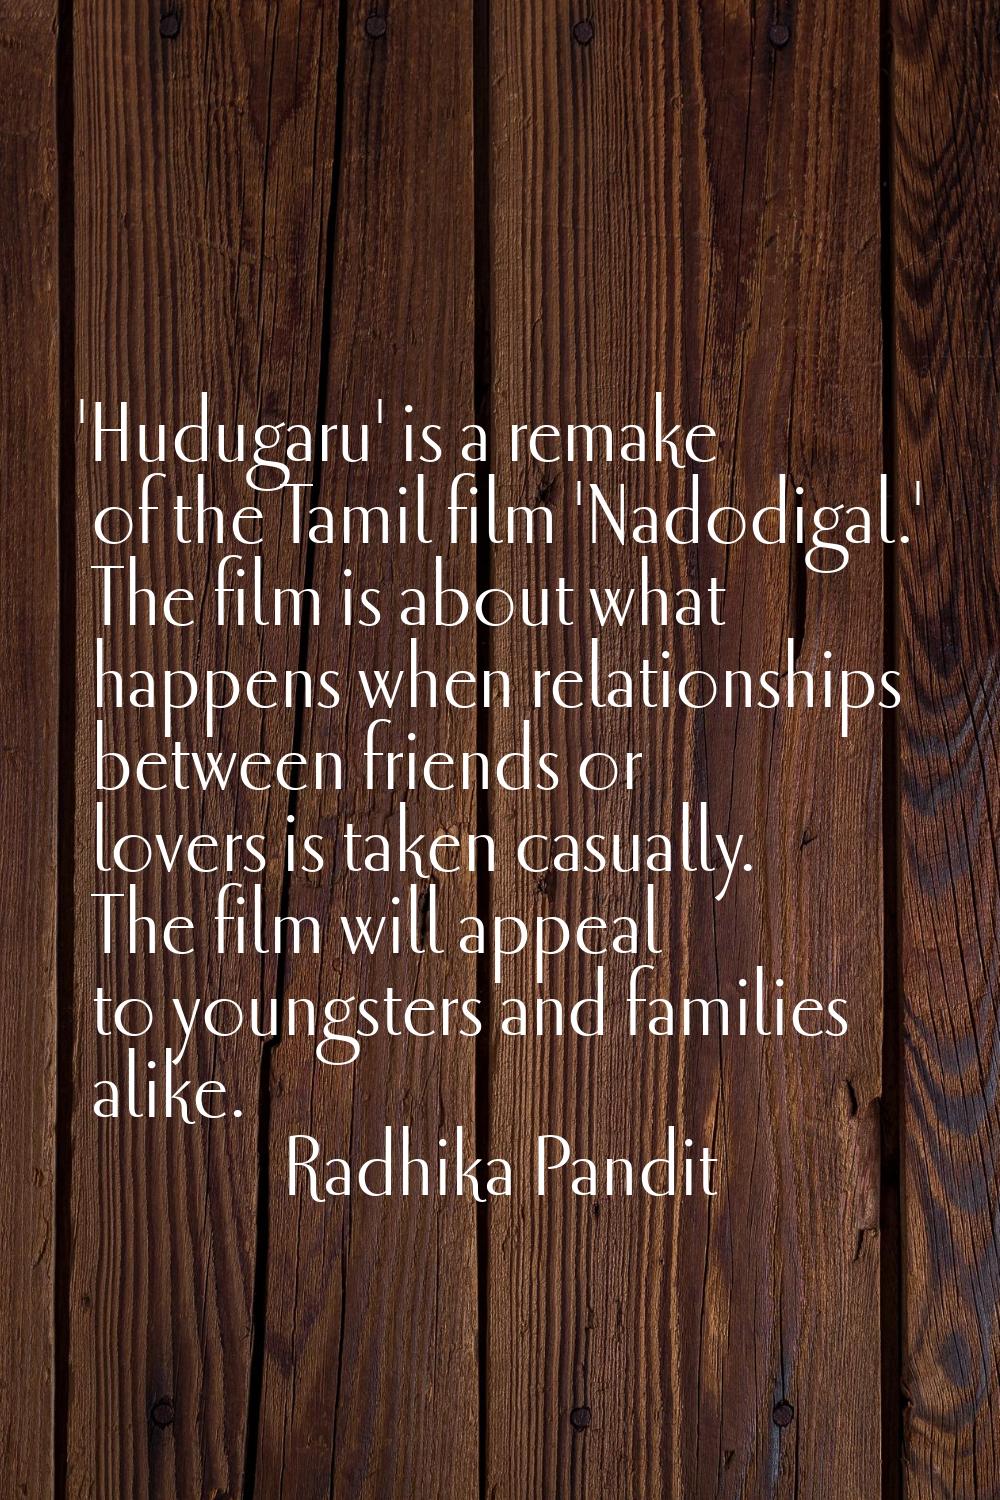 'Hudugaru' is a remake of the Tamil film 'Nadodigal.' The film is about what happens when relations